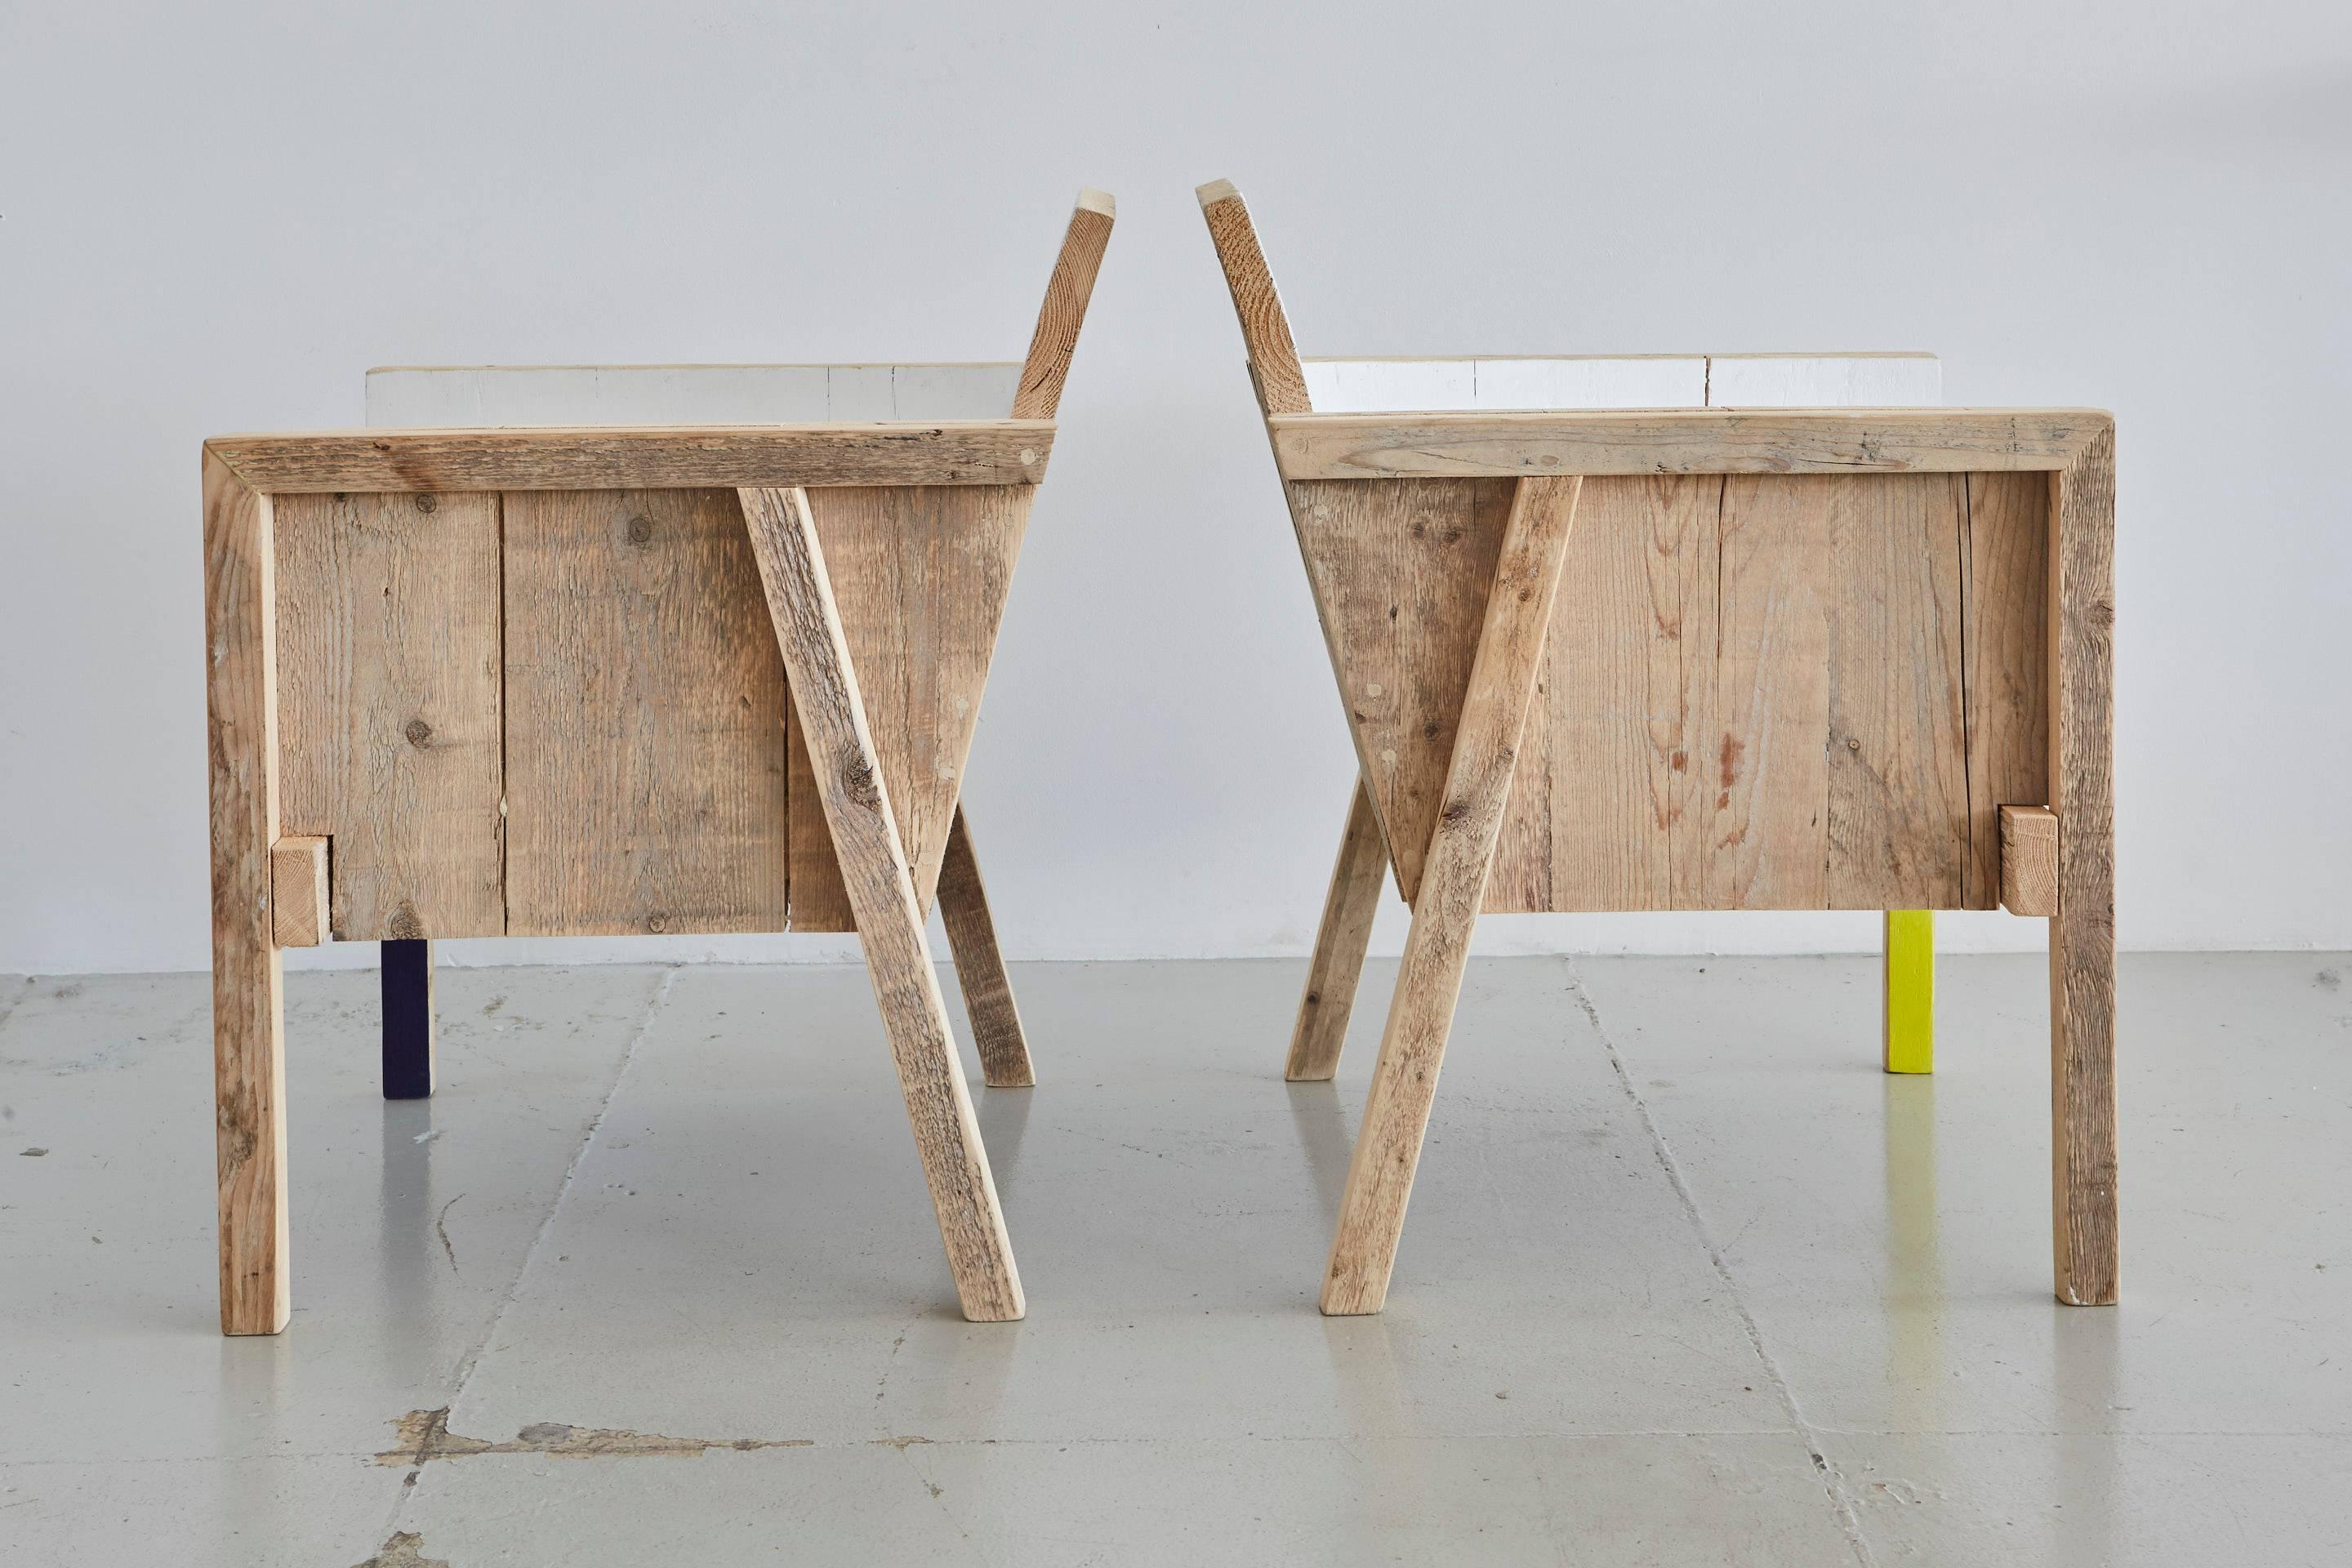 Pair of whimsical wood chairs by Netherland designer, Helen Vergouwen.
Great angles, wood cube shape and primary blue and yellow detail on the face and down one leg of each chair.